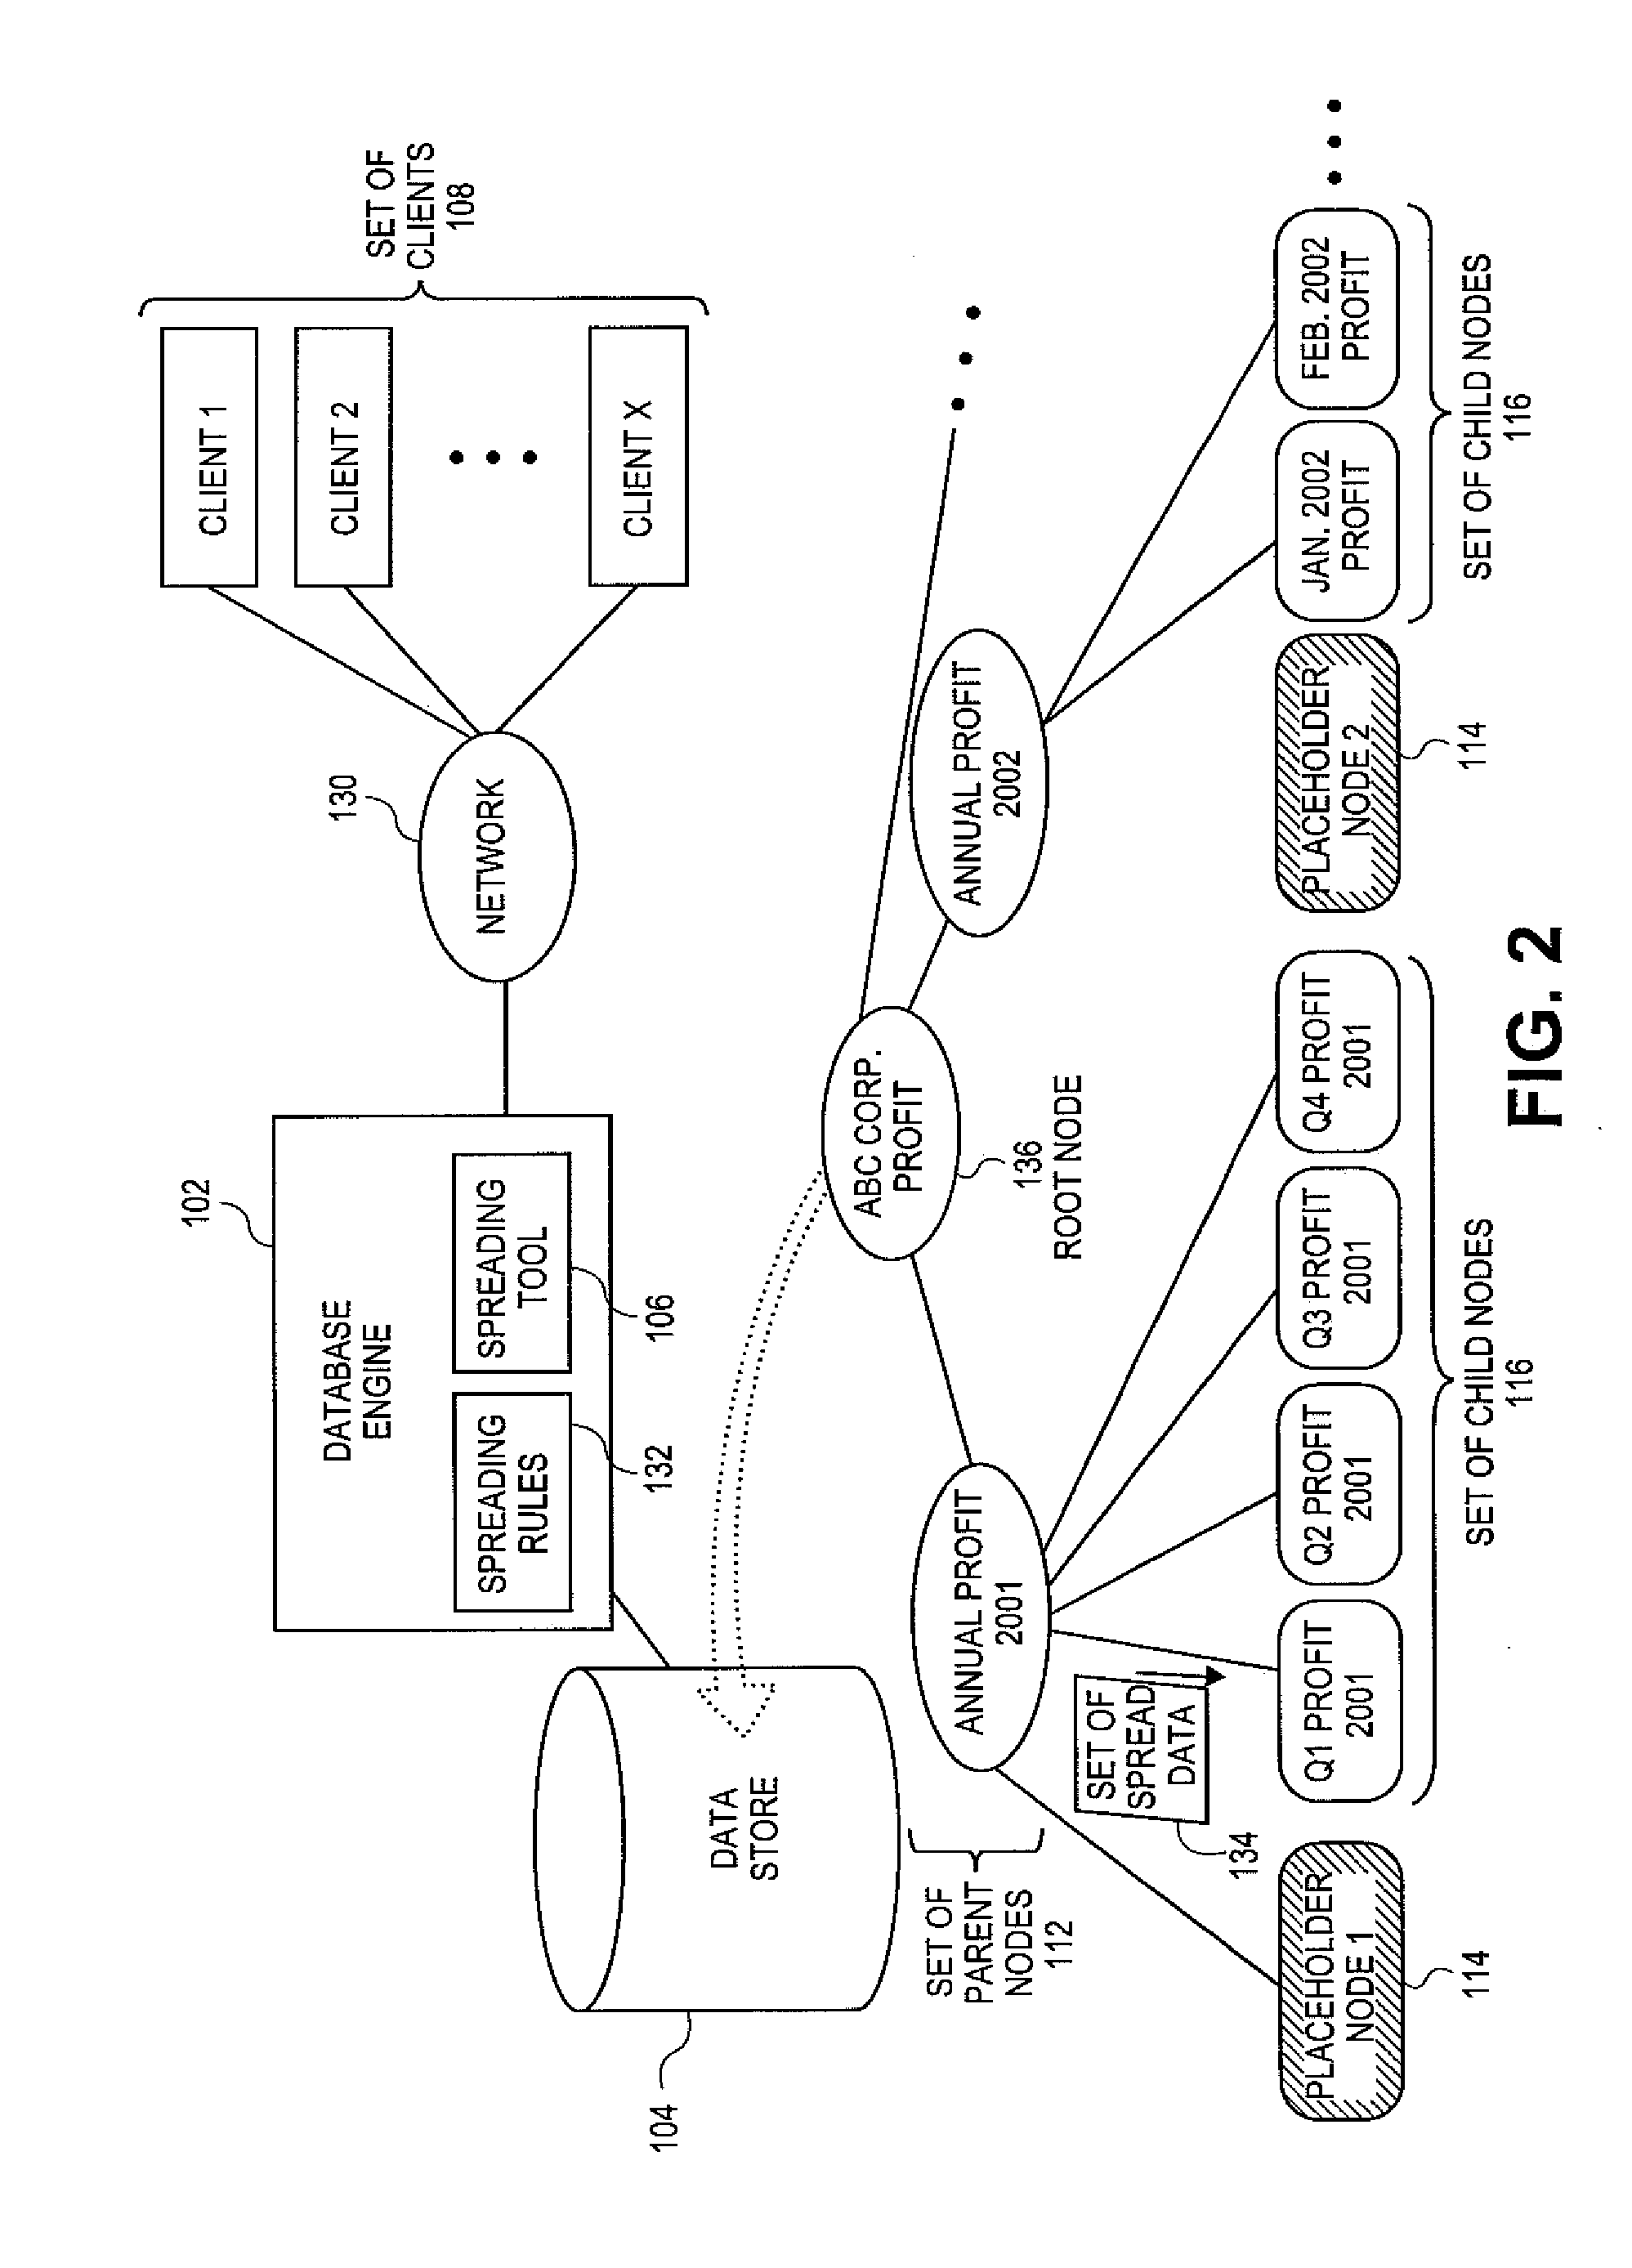 Systems and methods for generating iterated distributions of data in a hierarchical database